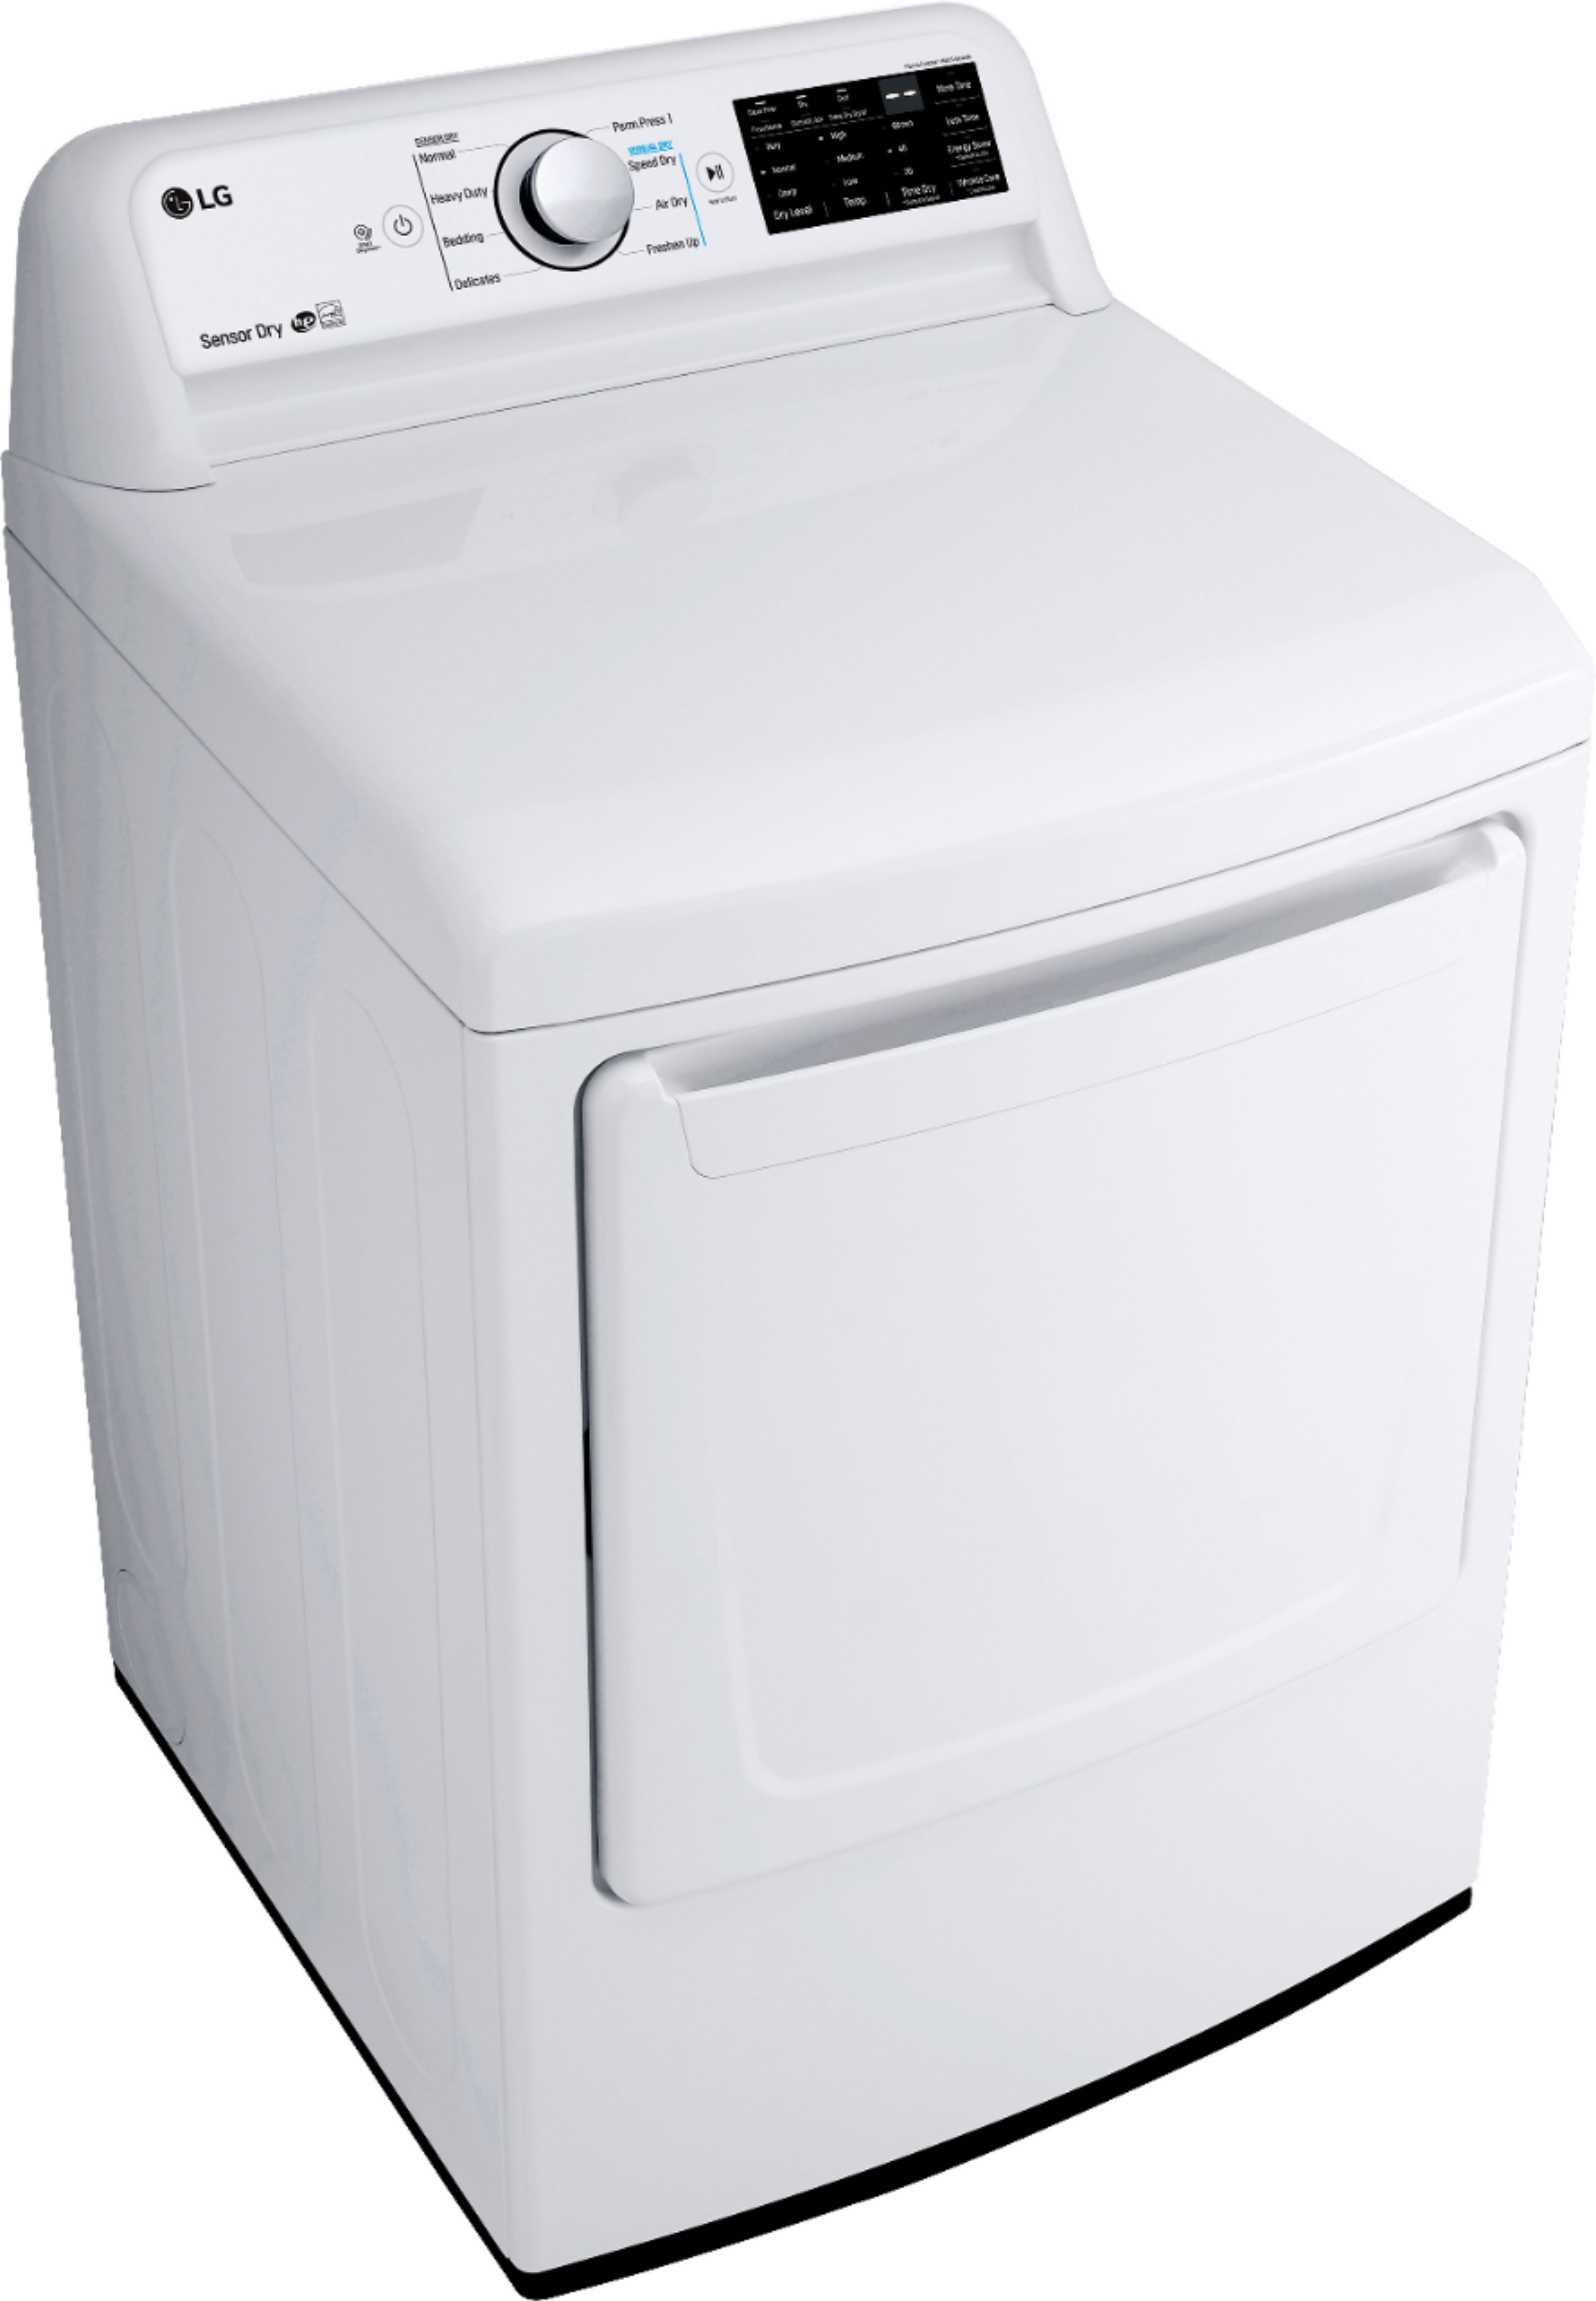 Angle View: LG - 7.3 Cu. Ft. Electric Dryer with Sensor Dry - White